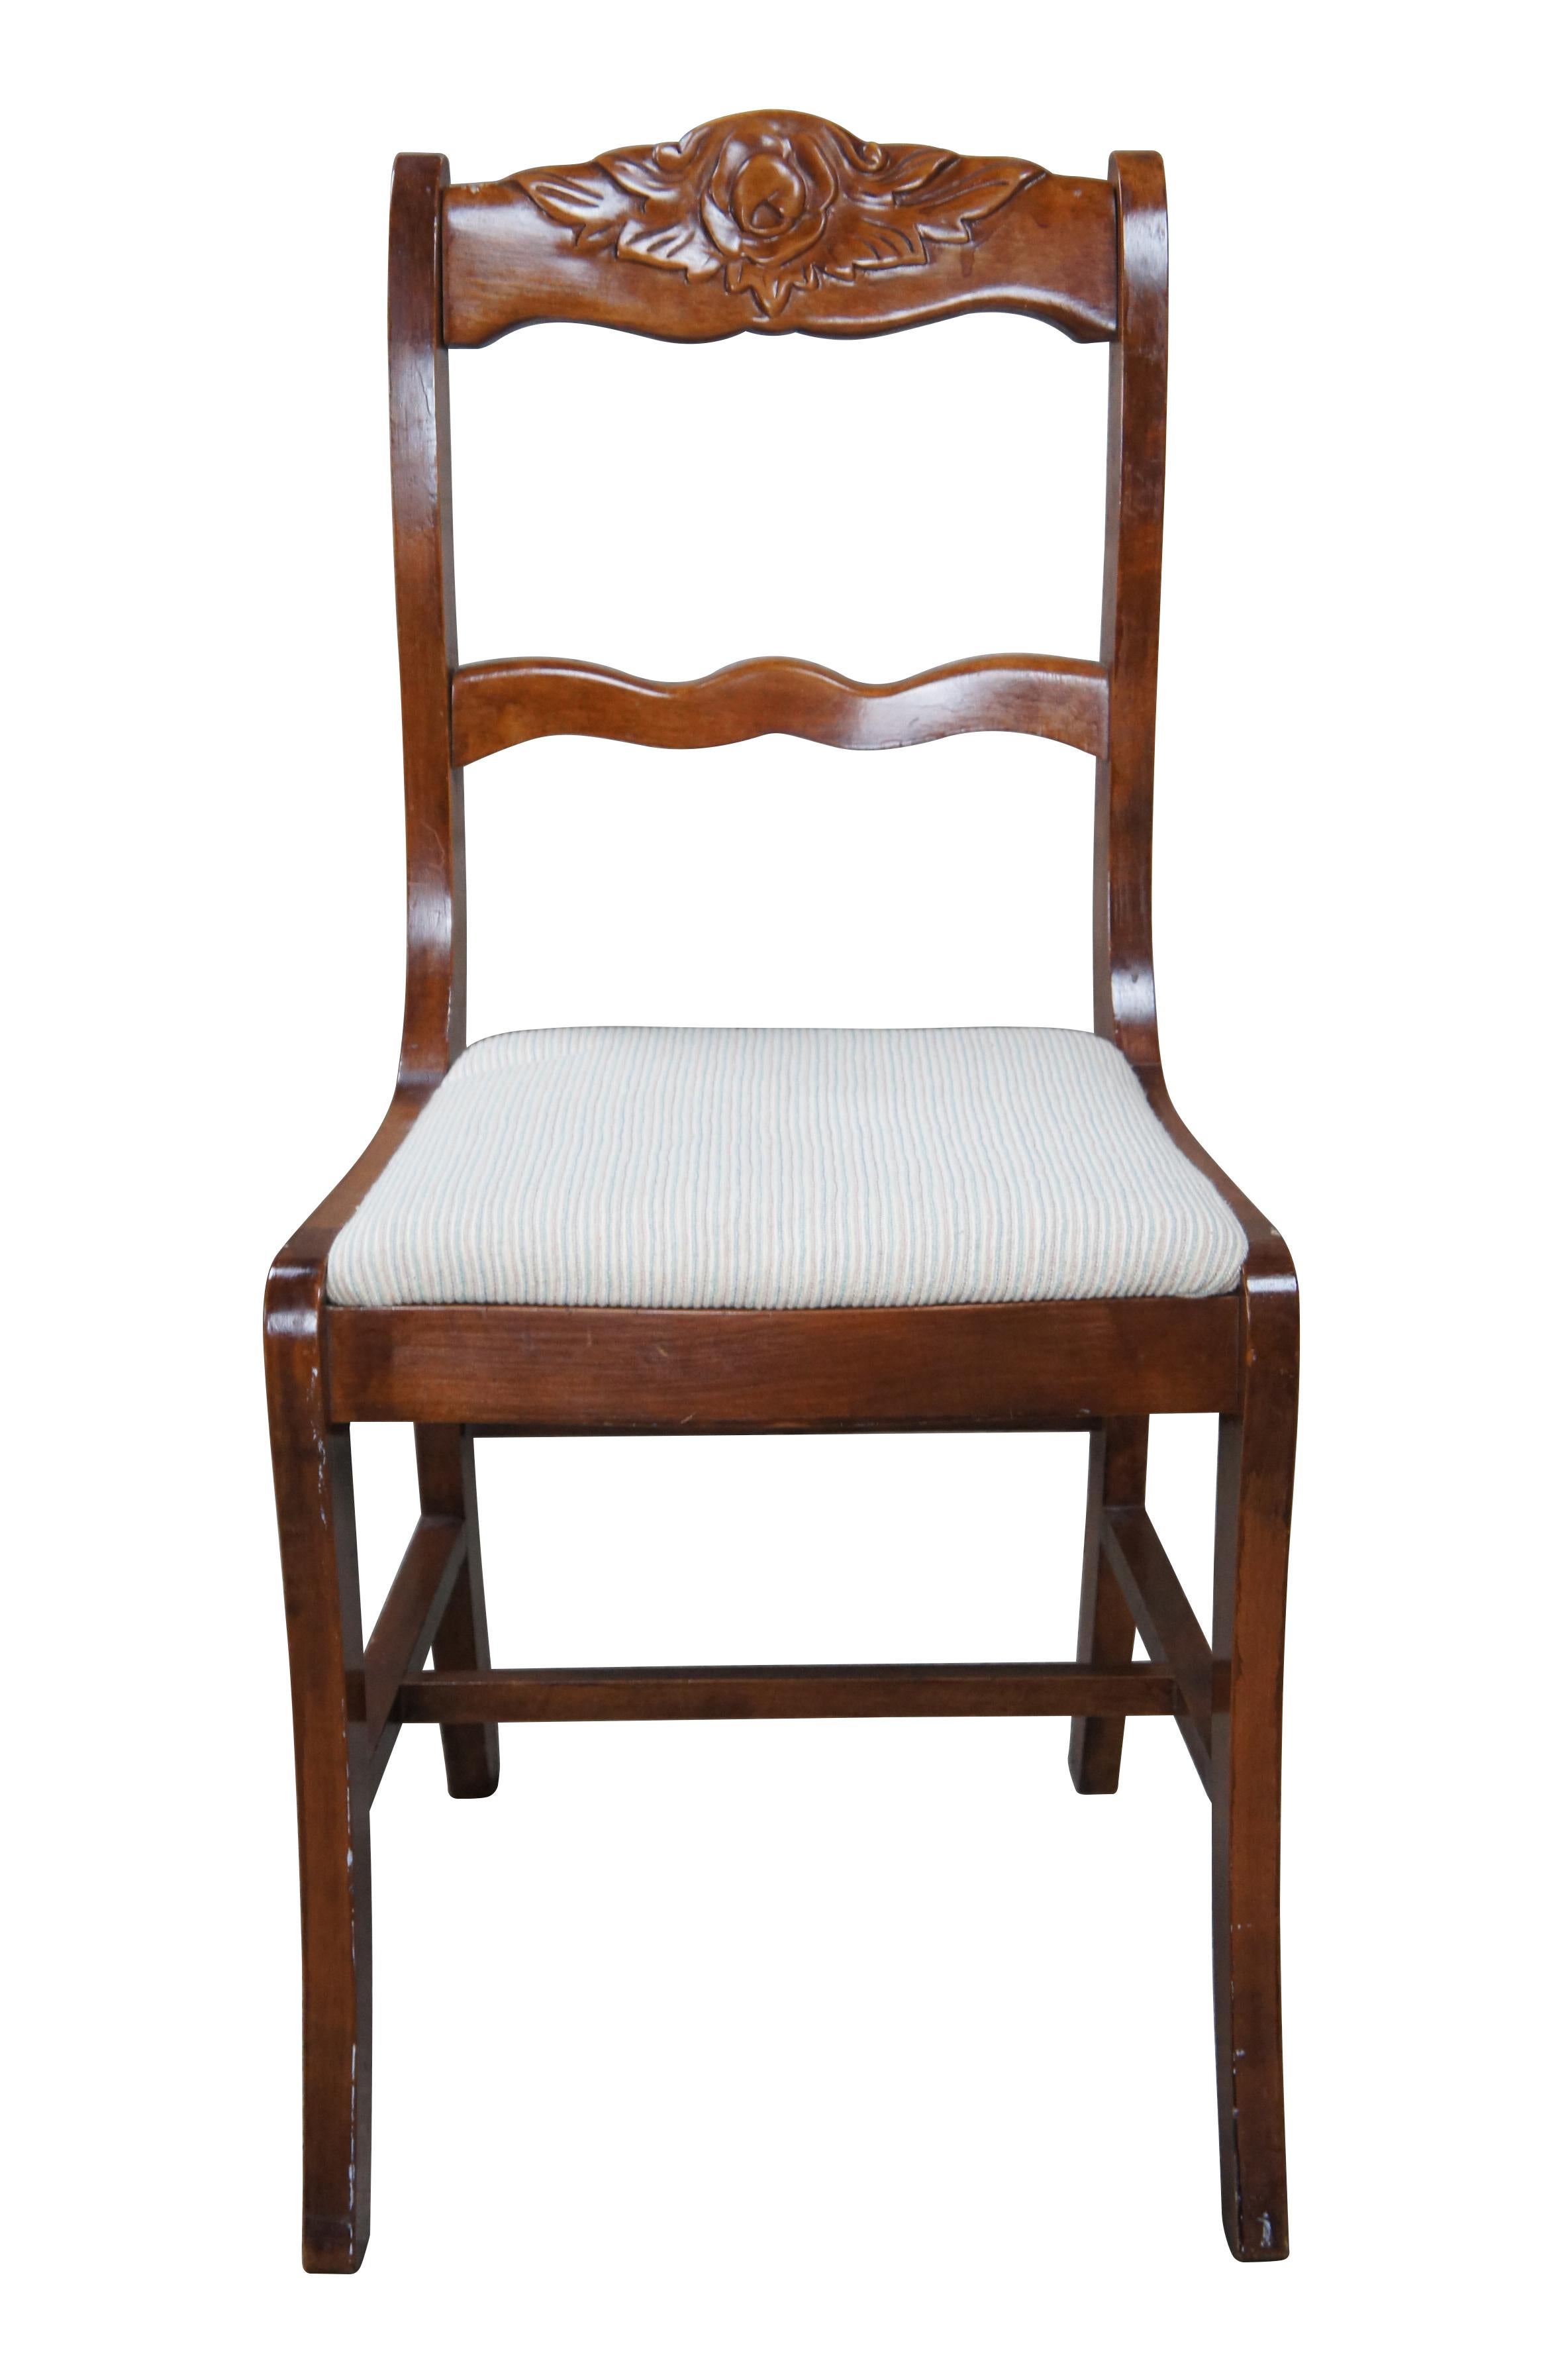 1940s Duncan Phyfe / Regency Style dining side chair.  Made from mahogany with a rose carved crest rail.  Features an upholstered seat with striped pattern.  Front and rear legs are saber shaped and connected by an H stretcher.

Dimensions:
17